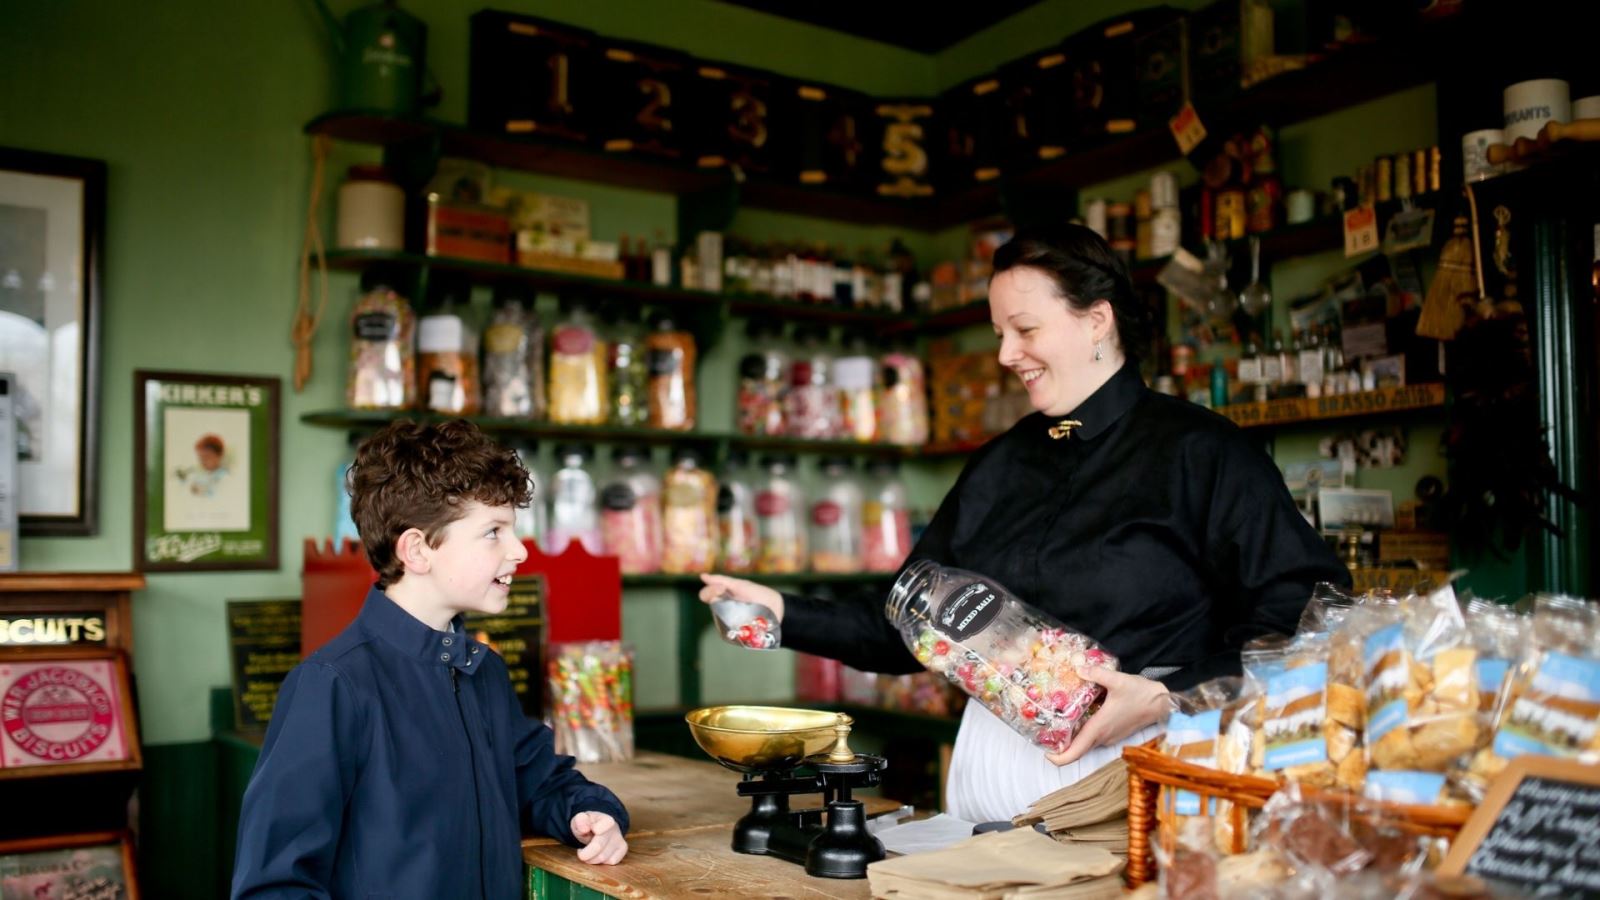 A young boy enjoying an outing to the Ballycultra Sweet Shop in the Ulster Folk Museum, Cultra